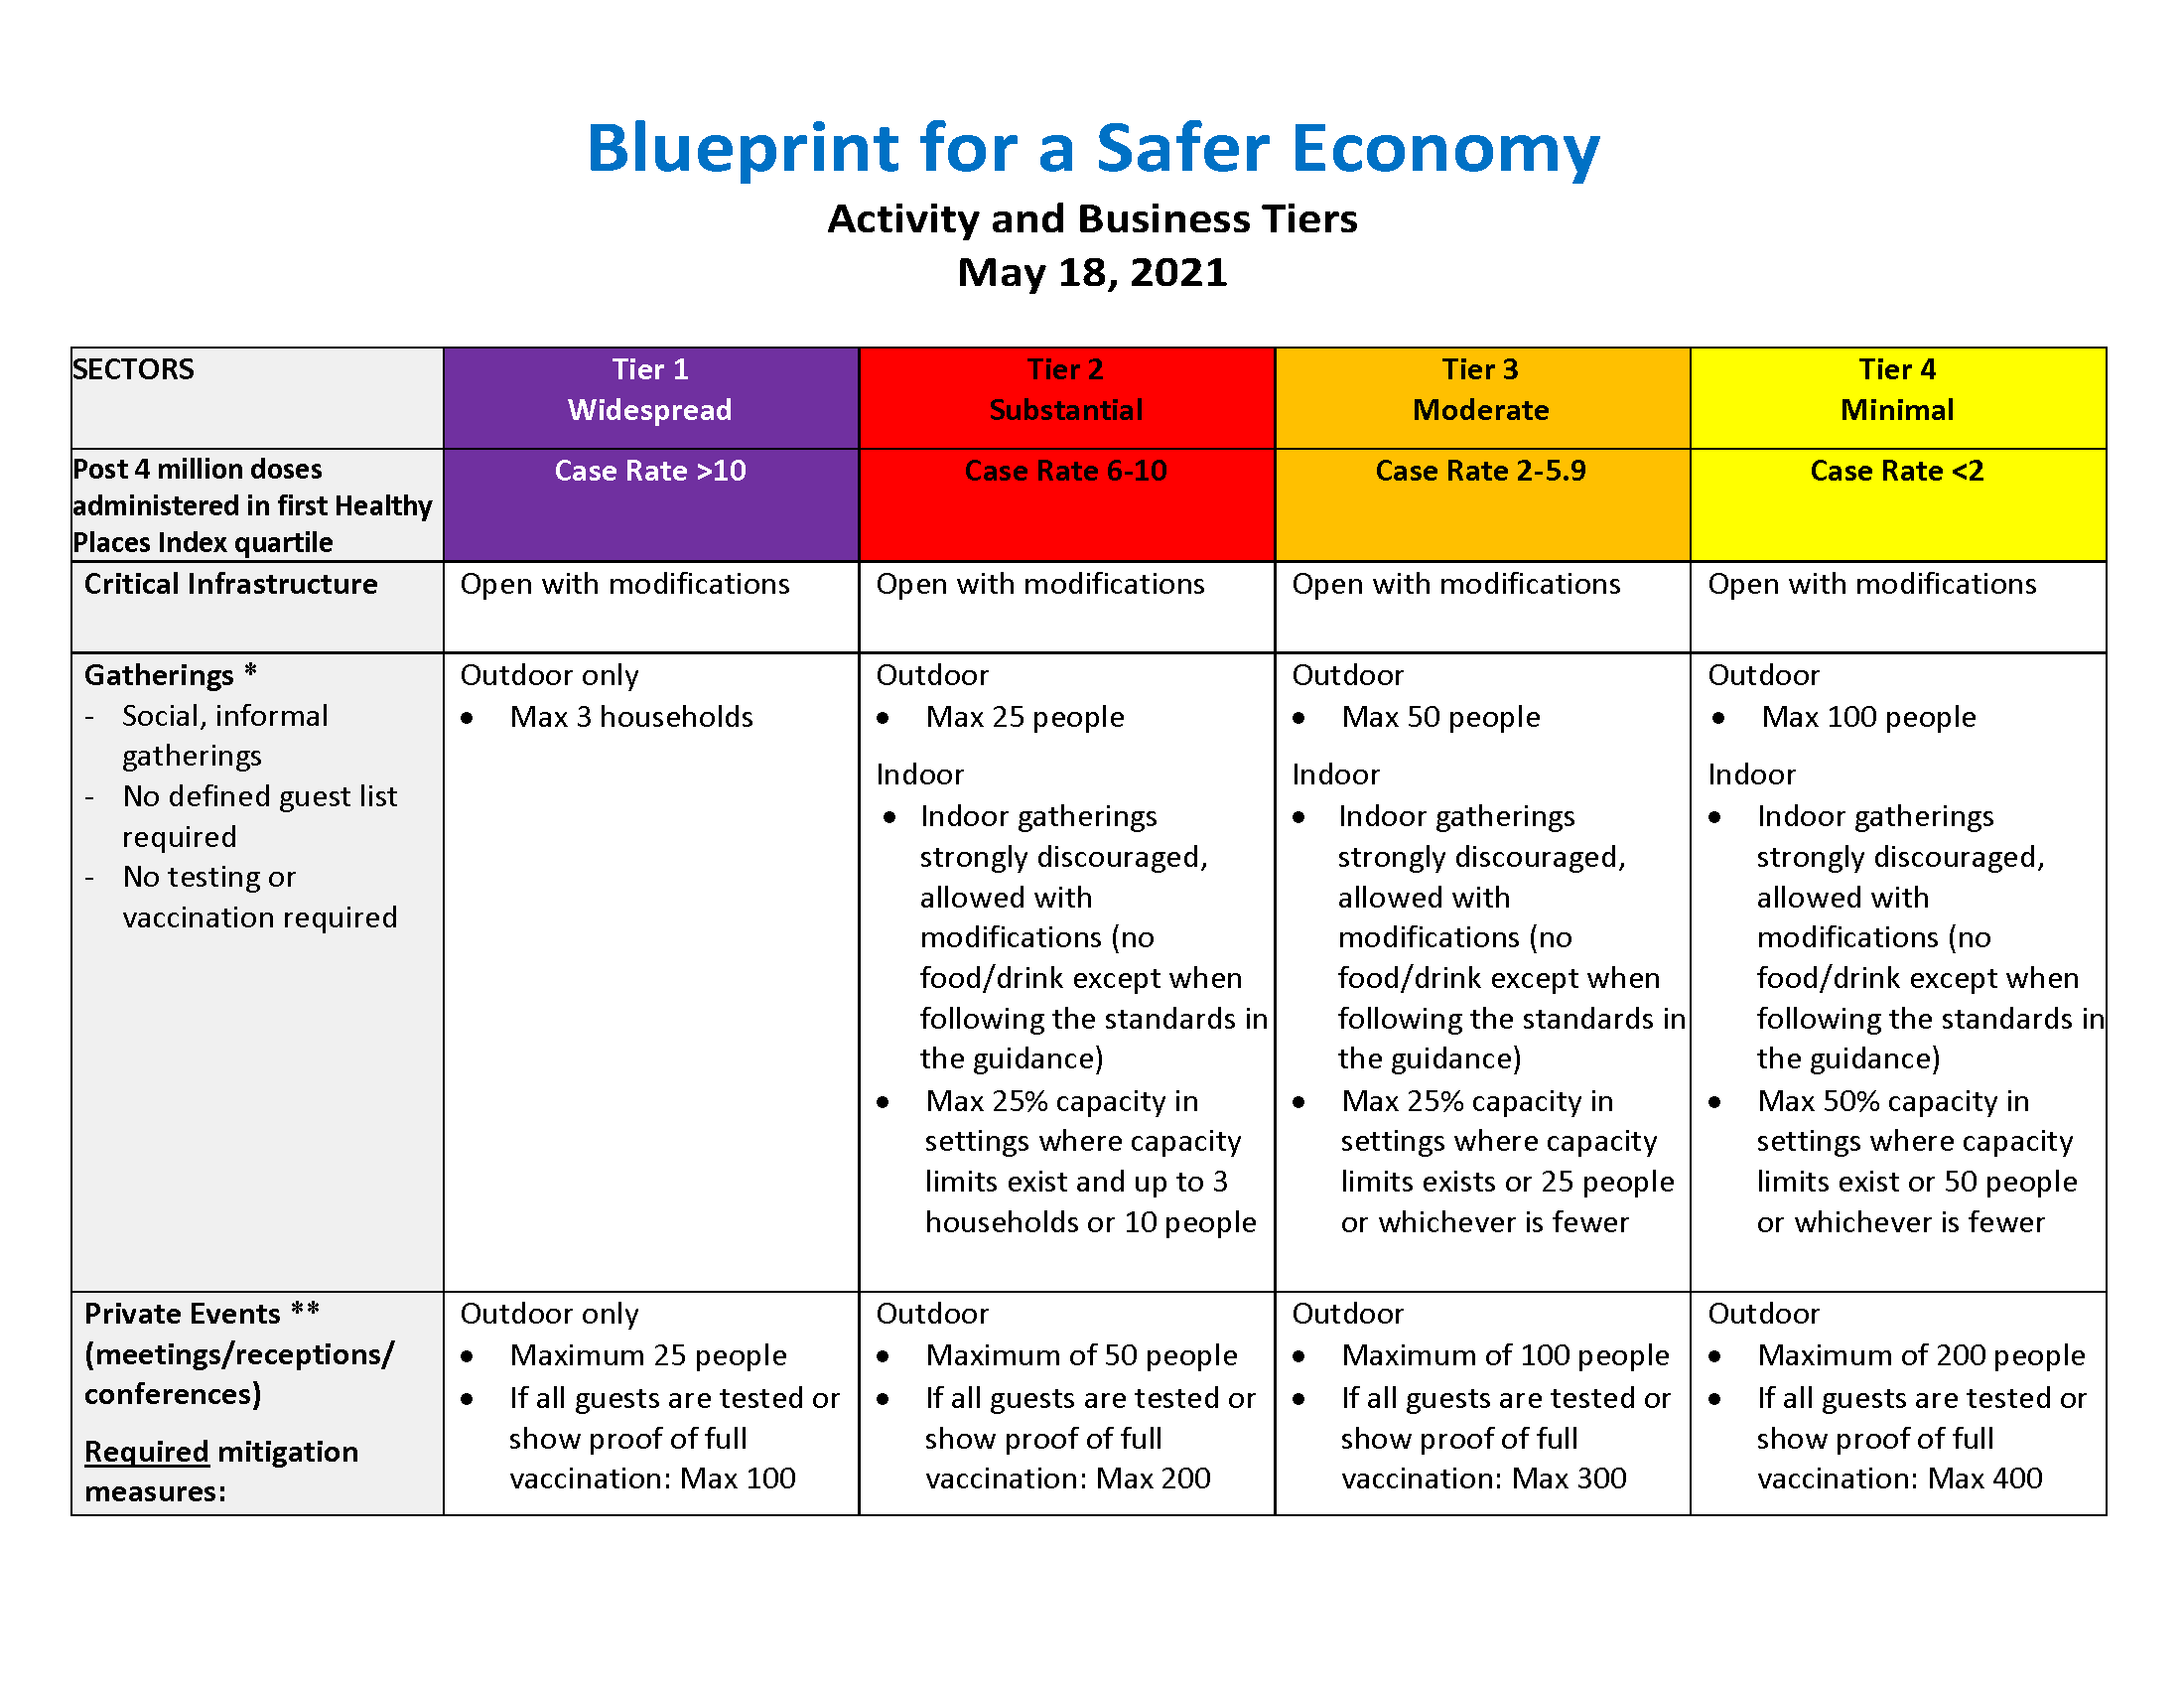 More information about "CDPH Blueprint Activity and Business Tiers Framework - May 18, 2021 (Updated)"